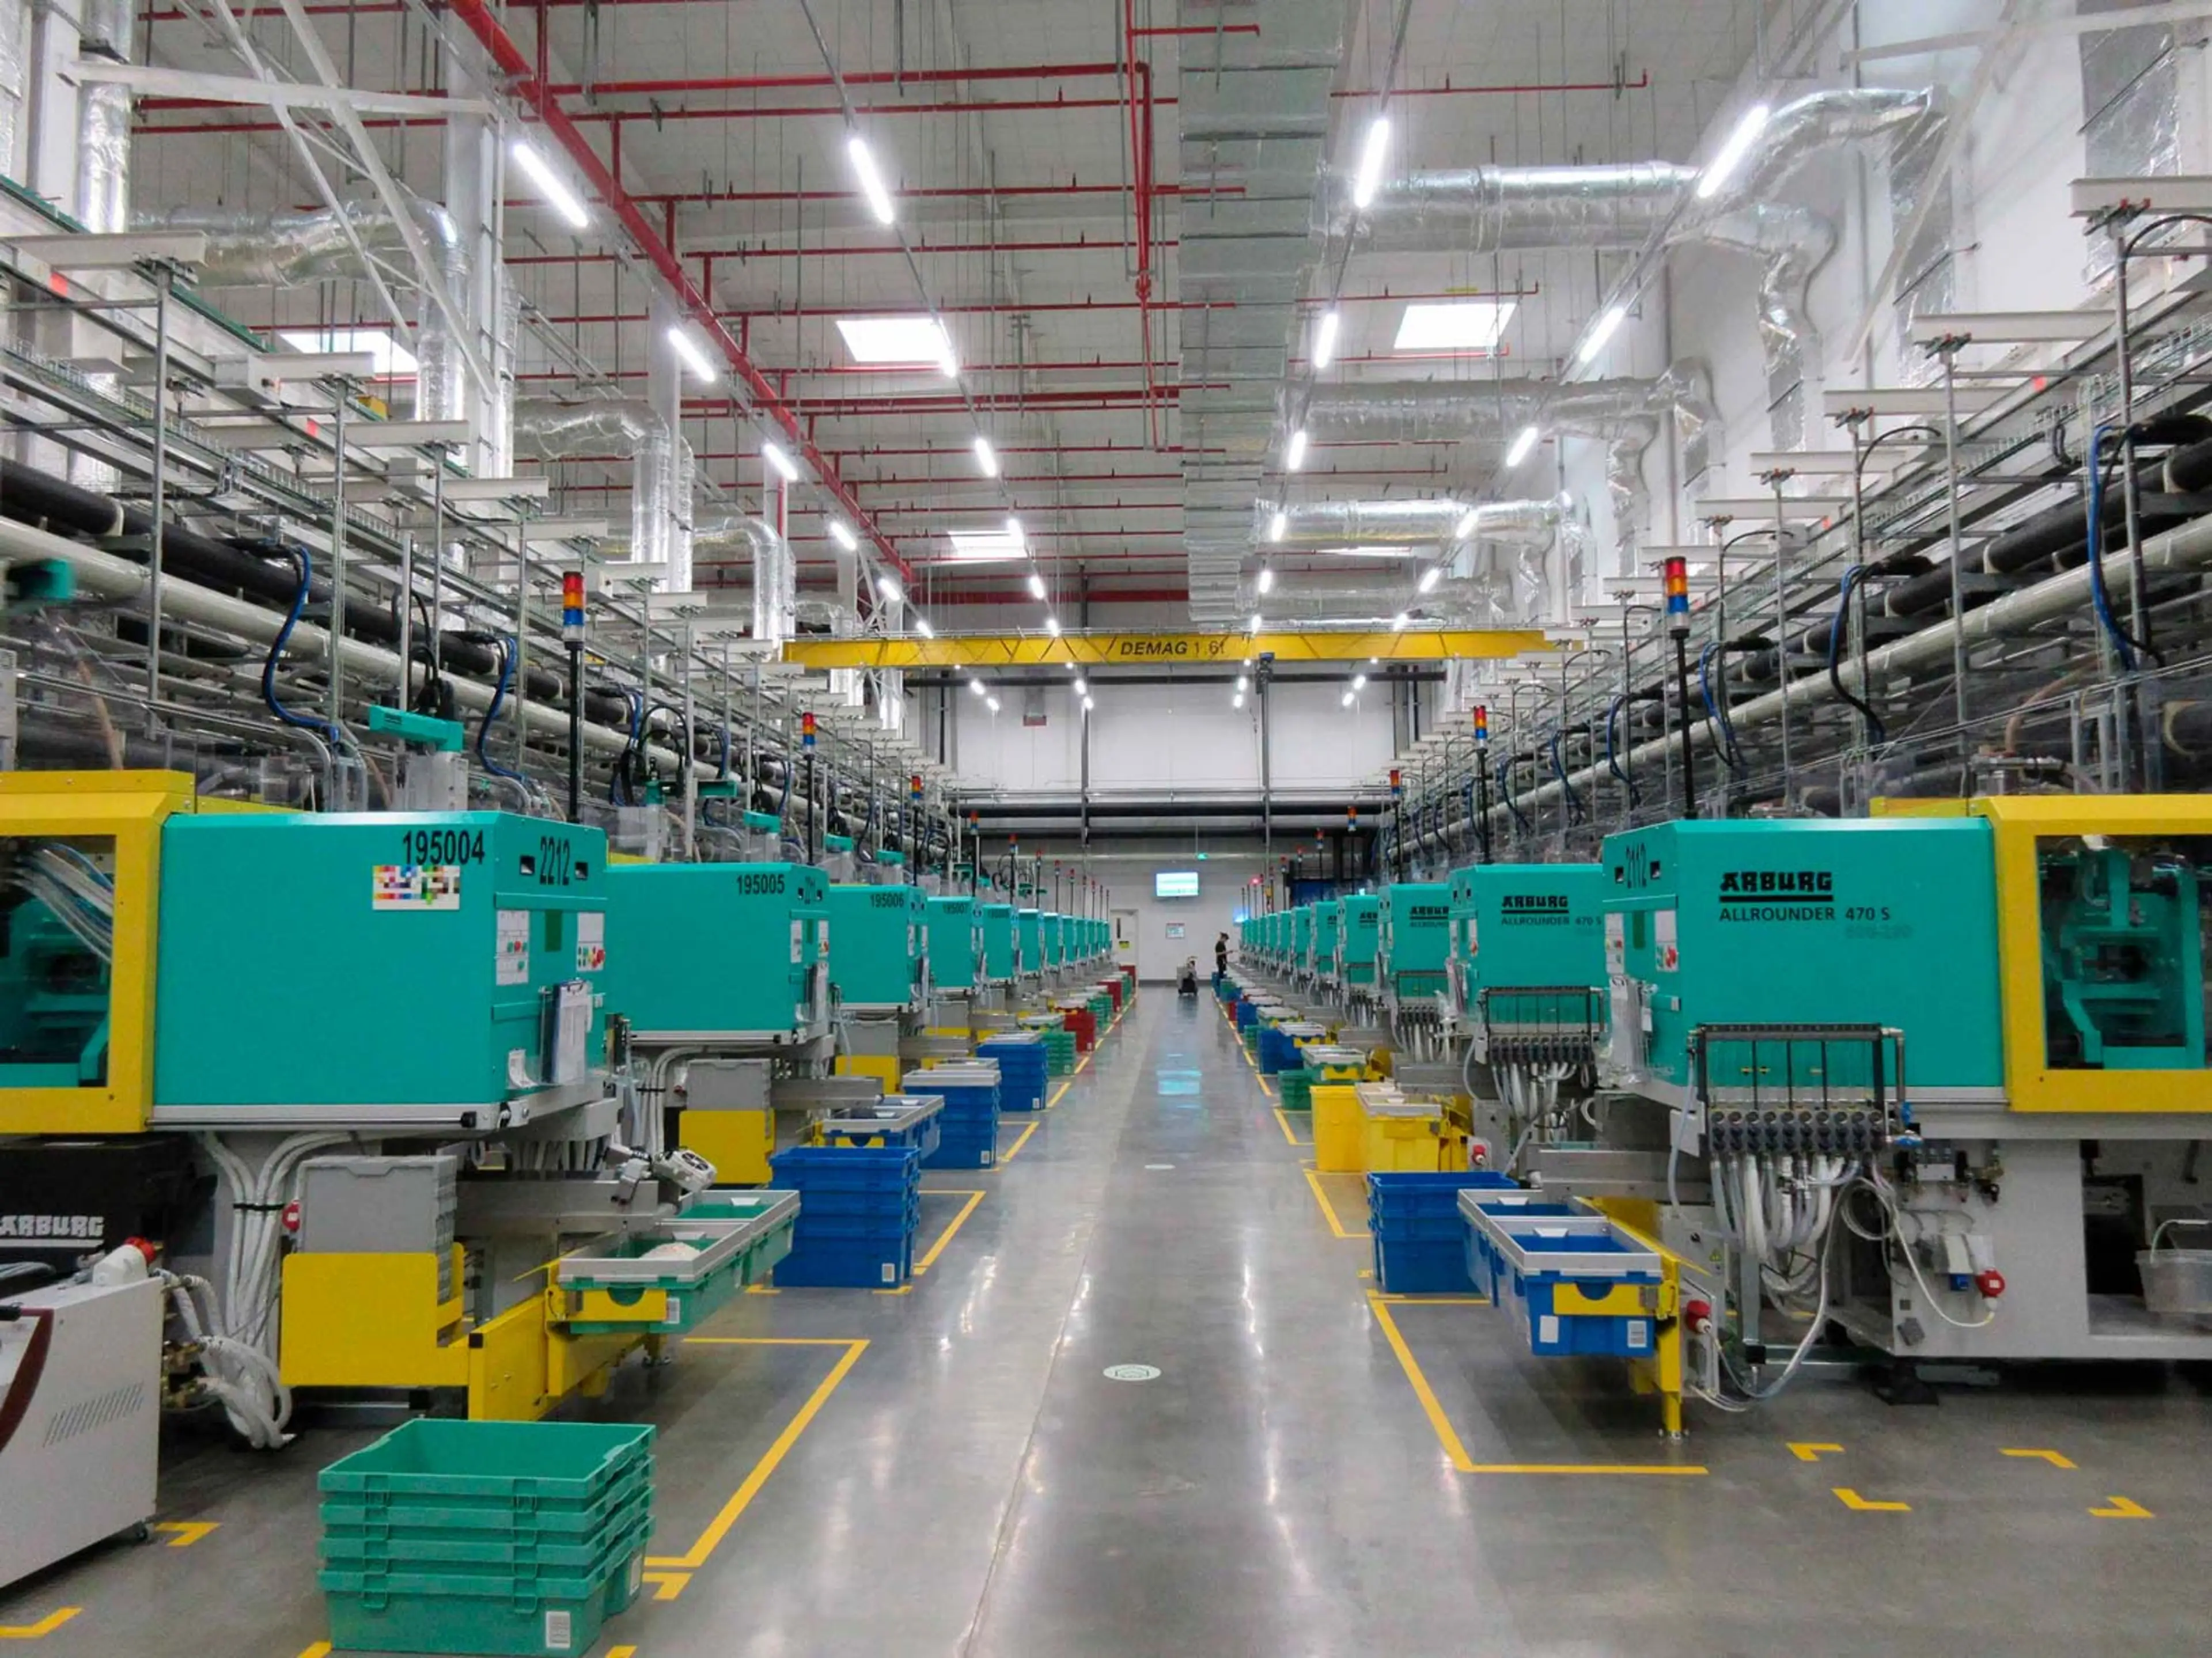 Rows of moulding machines